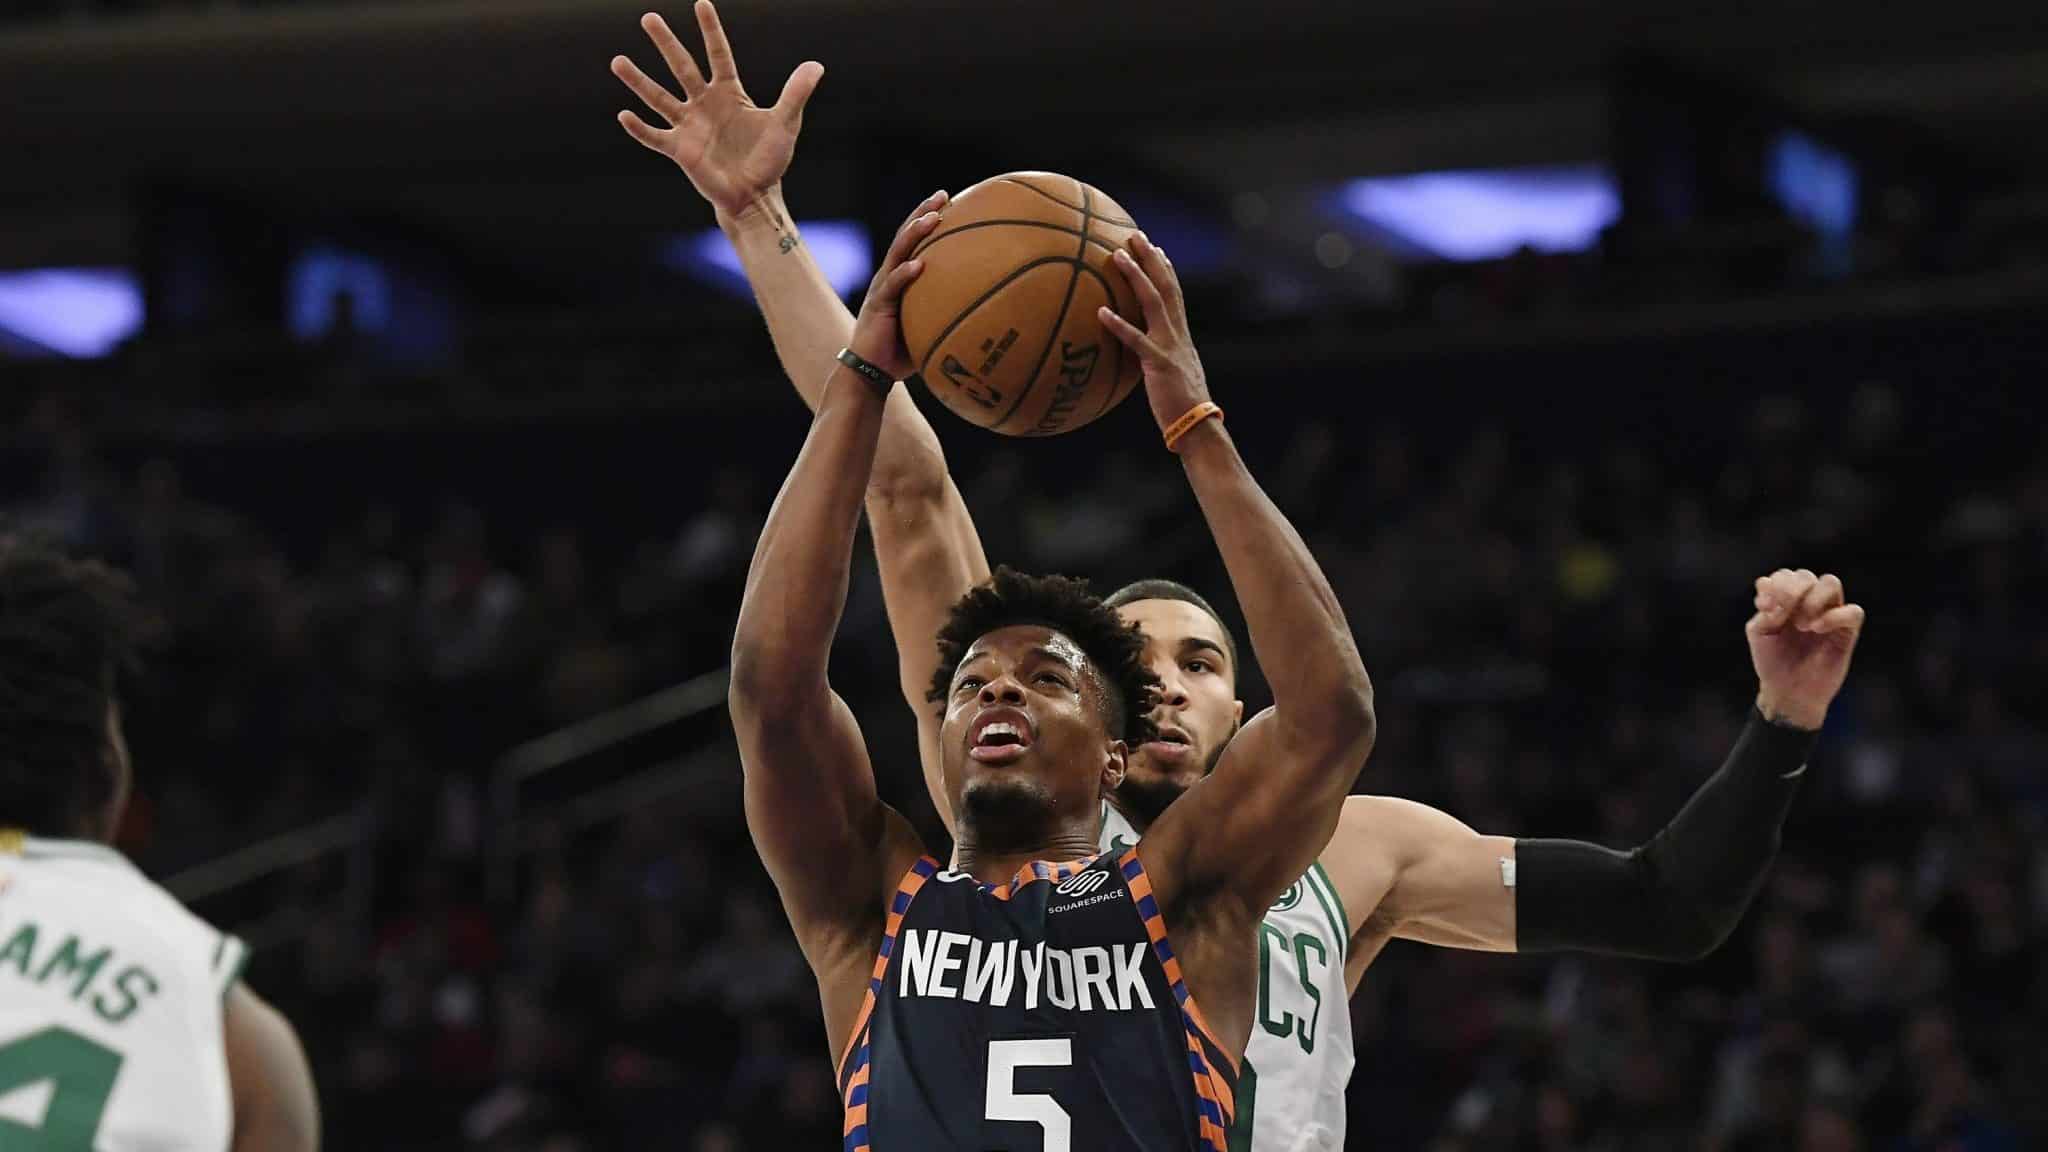 New York Knicks guard Dennis Smith Jr. (5) attempts a basket during the first half of an NBA basketball game against the Boston Celtics, Sunday, Dec. 1, 2019, in New York.